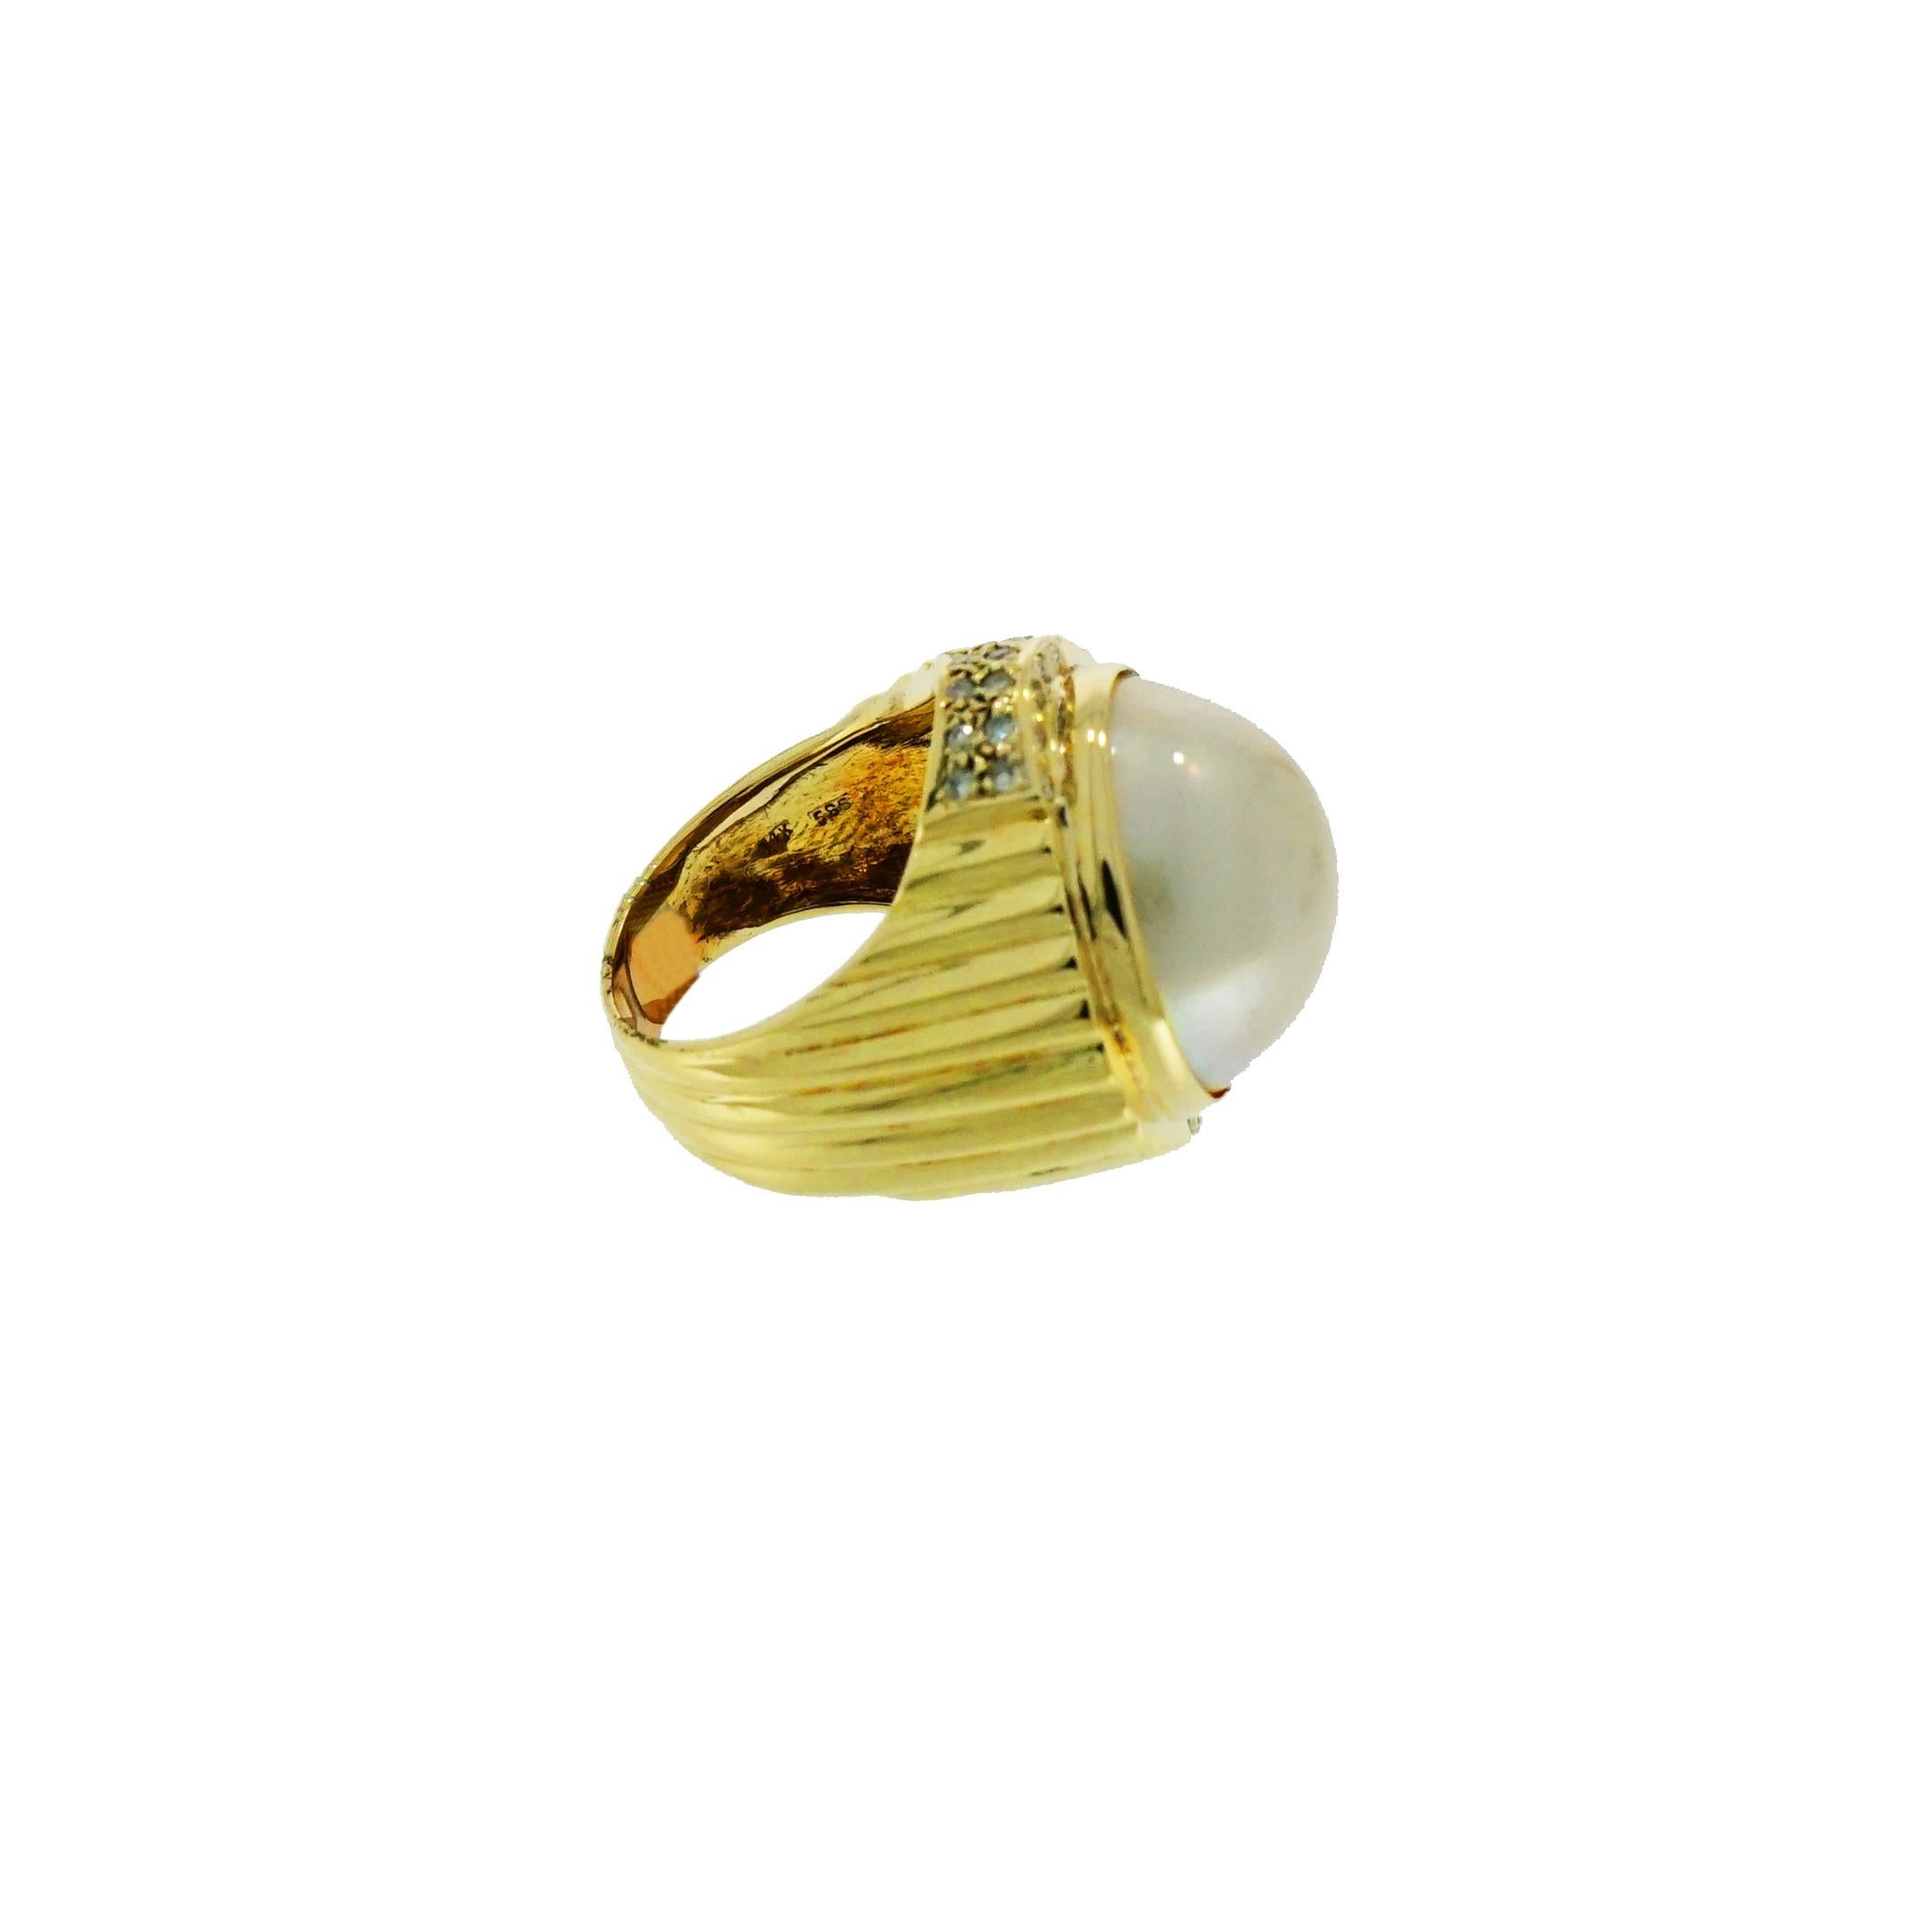 This Mabe Pearl and Diamond cocktail ring is handmade in 14K Yellow Gold.
The setting is designed with straight lines with Diamond Pave accents at each side of the ring (north - south). The Mabe pearl measures approximately 16-17mm in diameter, has